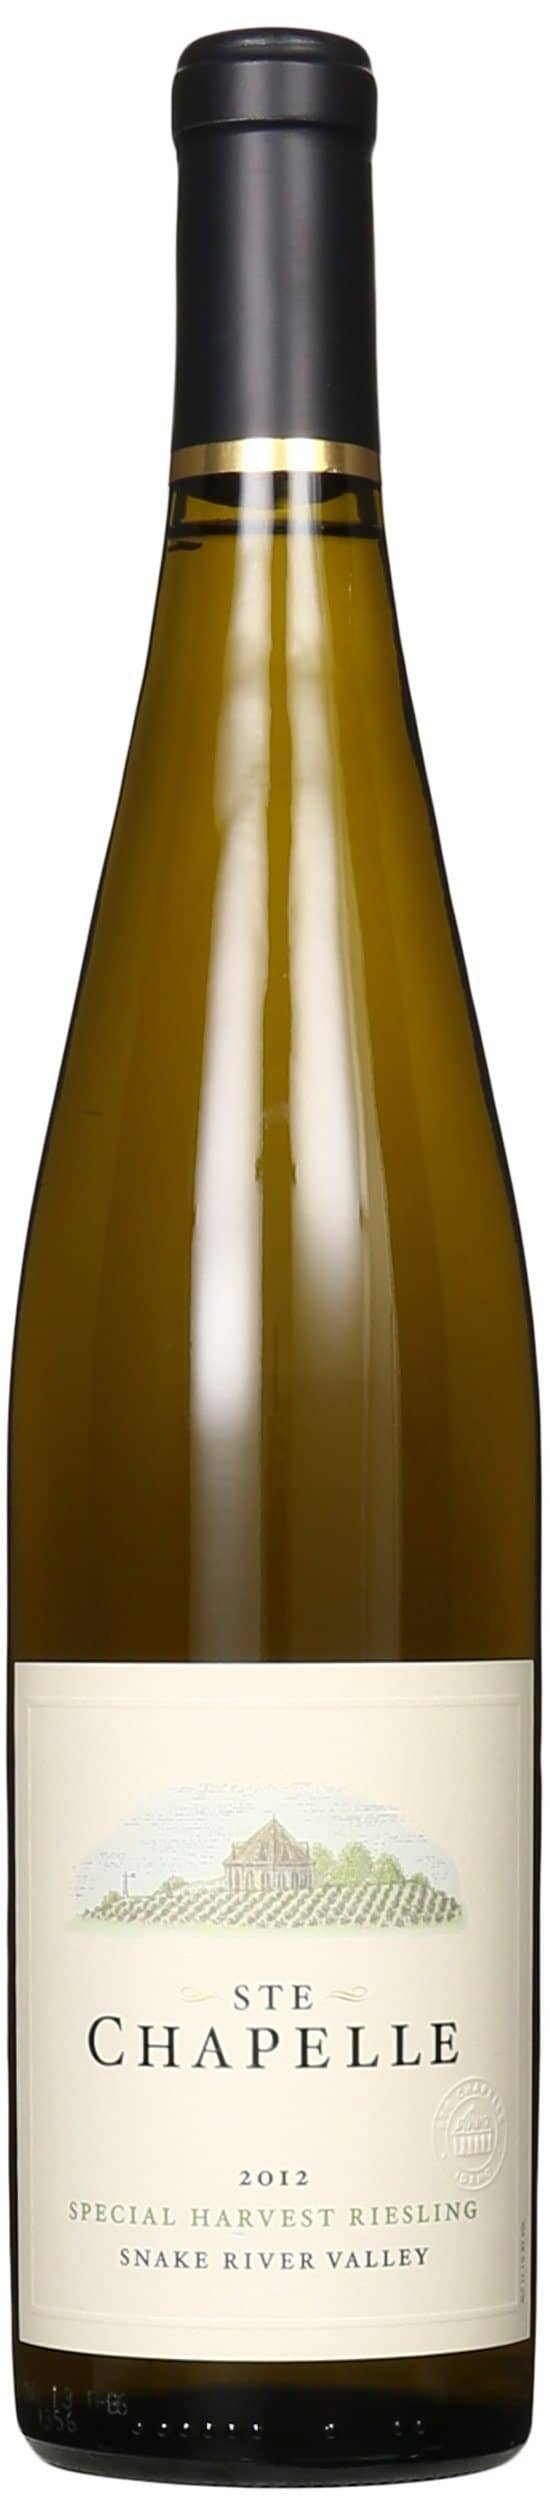 2012 Ste Chappelle Special Harvest Riesling Wine